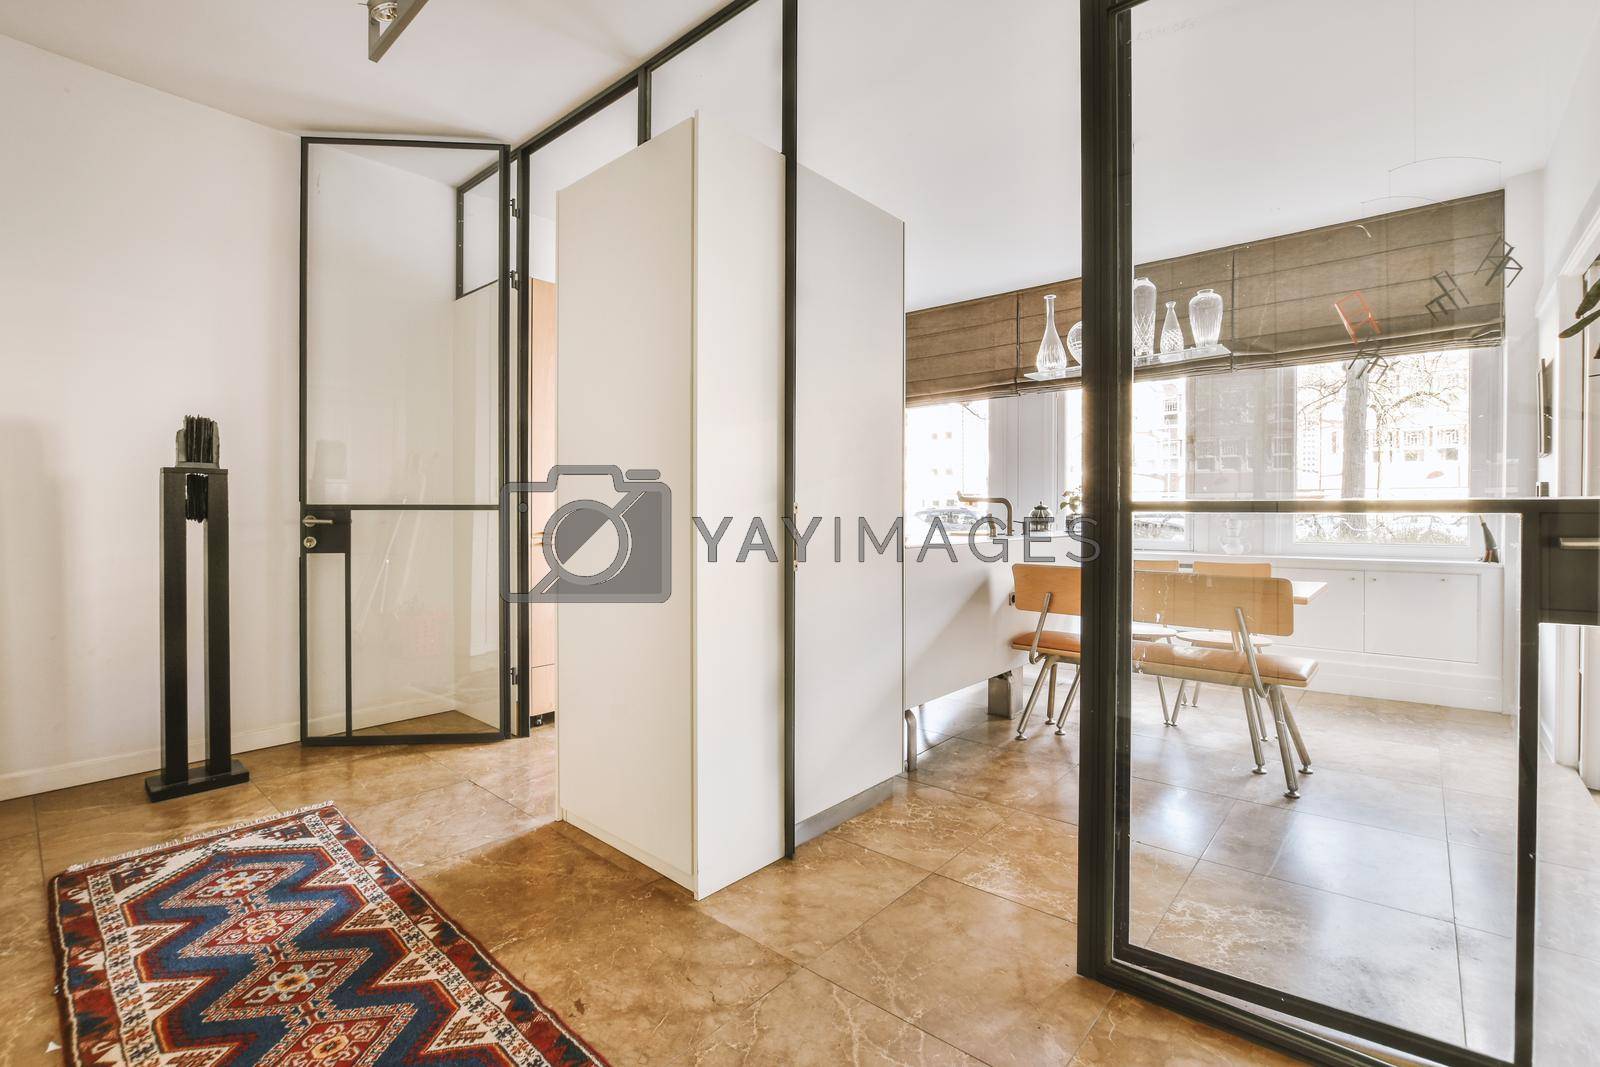 Royalty free image of A corridor leading inside the apartment with glass doors and walls by casamedia